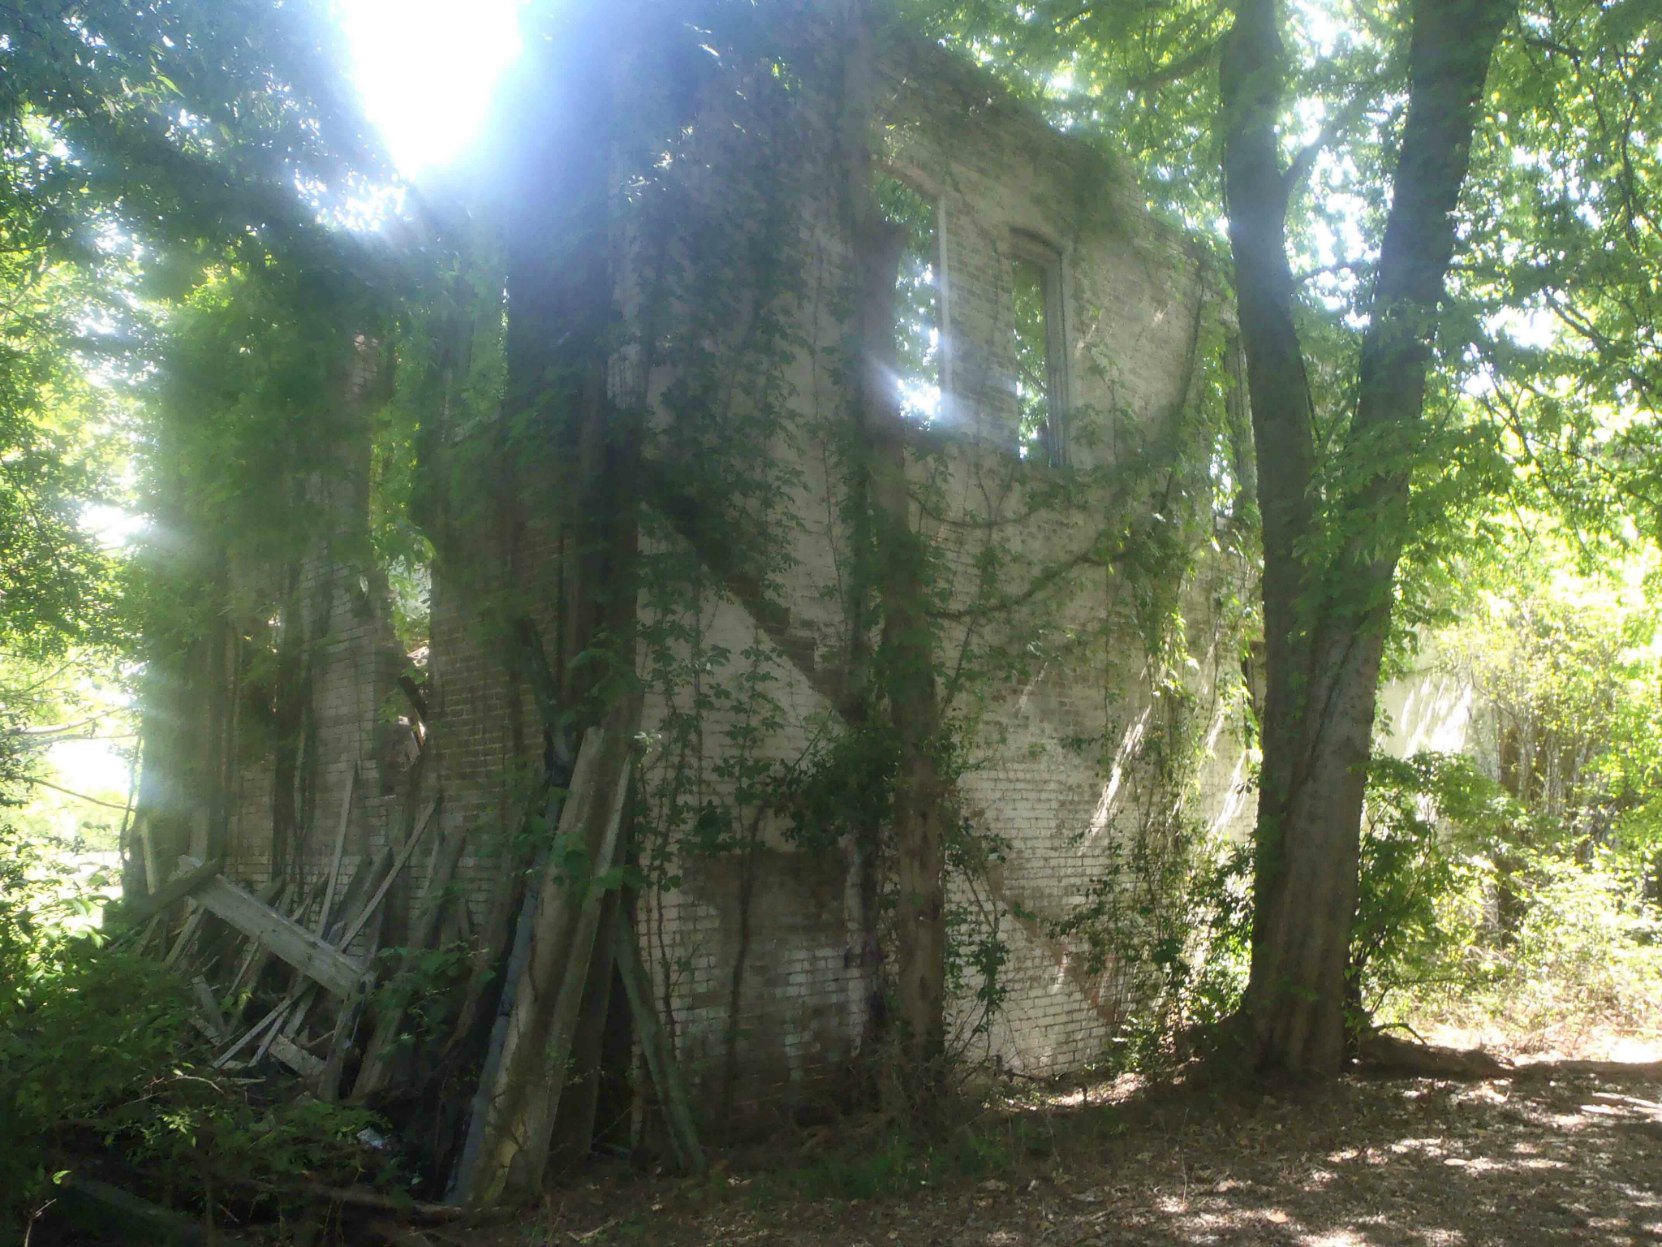 The ruins of Bryant's Grocery, Money, Leflore County, Mississippi. This was once the rear side of the building.